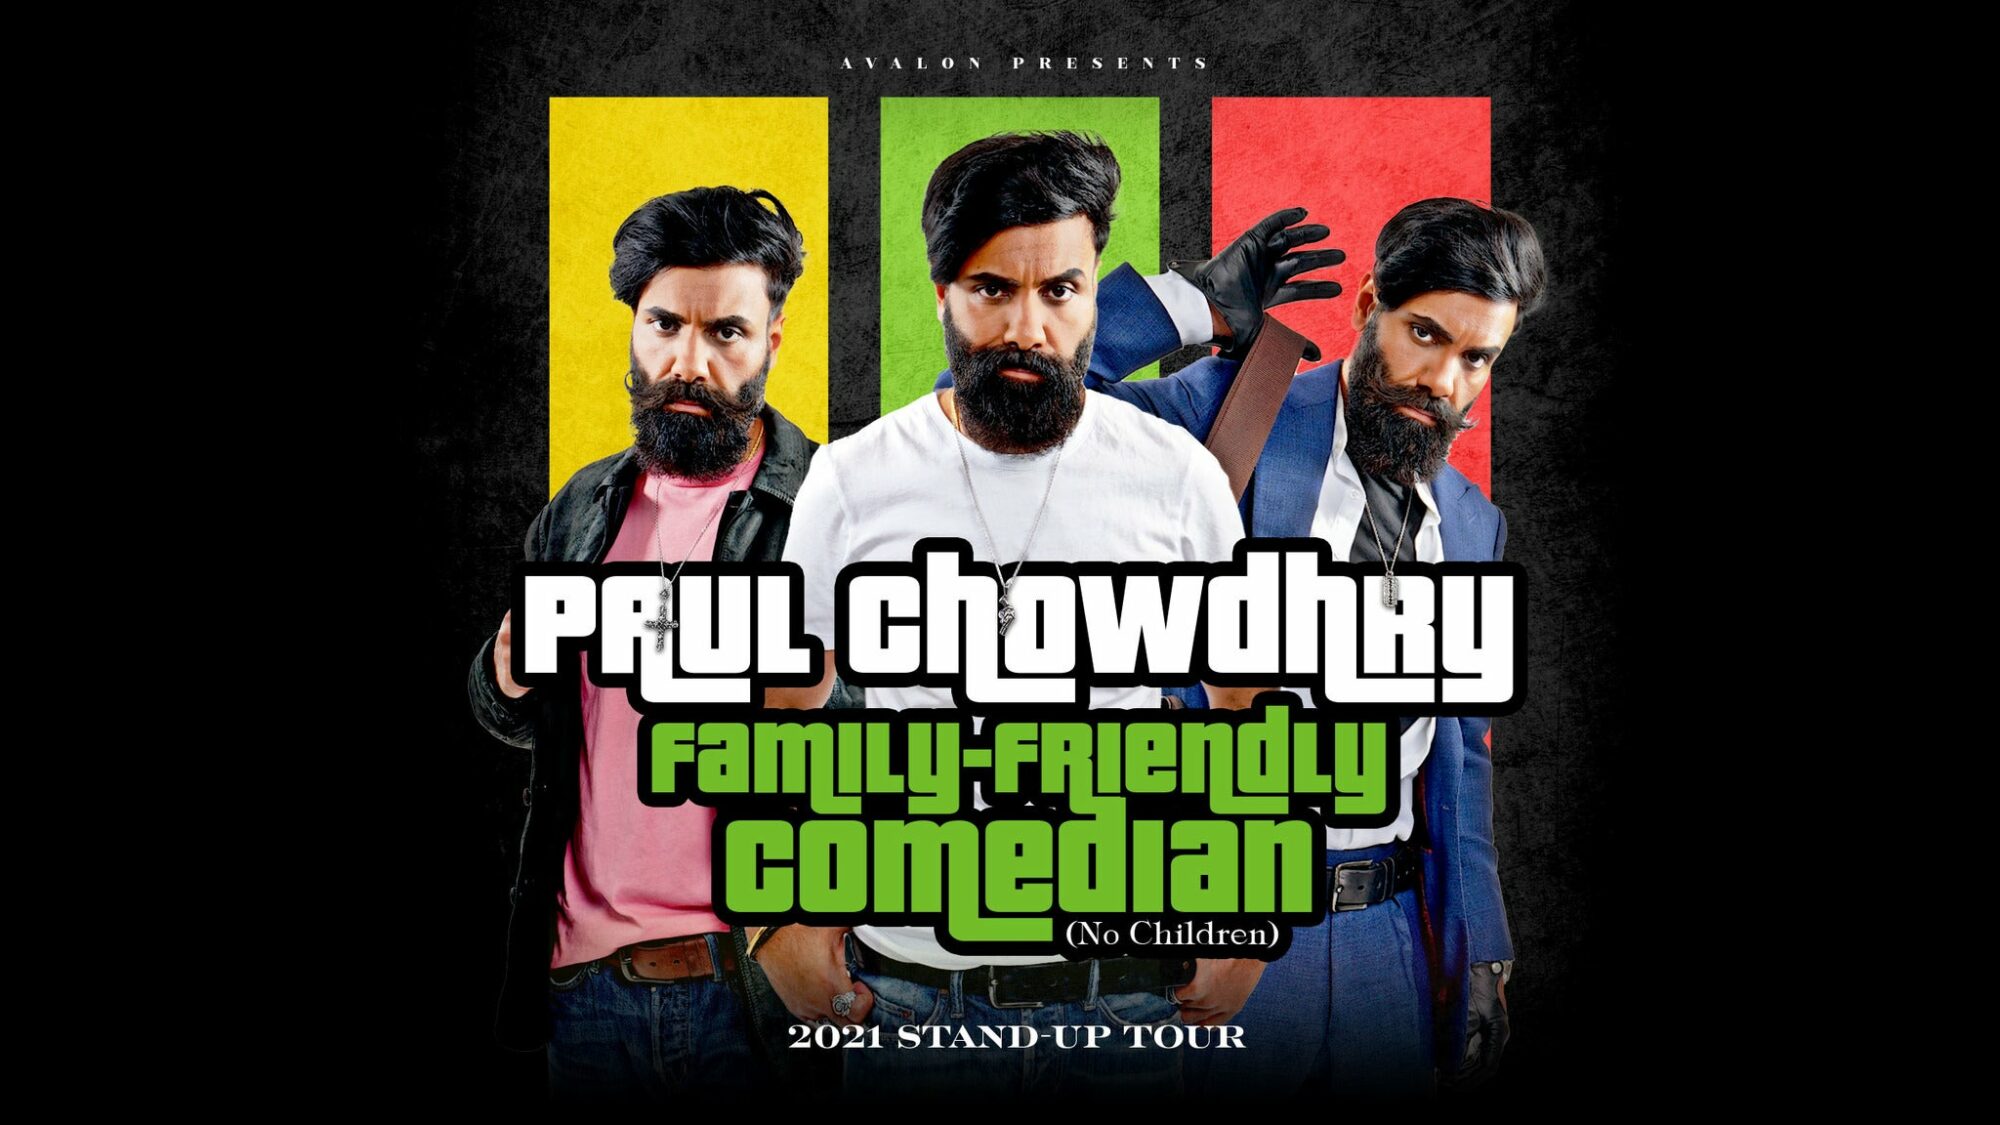 Image name Paul Chowdhry Family Friendly Comedian at St Georges Hall Bradford Bradford the 19 image from the post Events in Yorkshire.com.